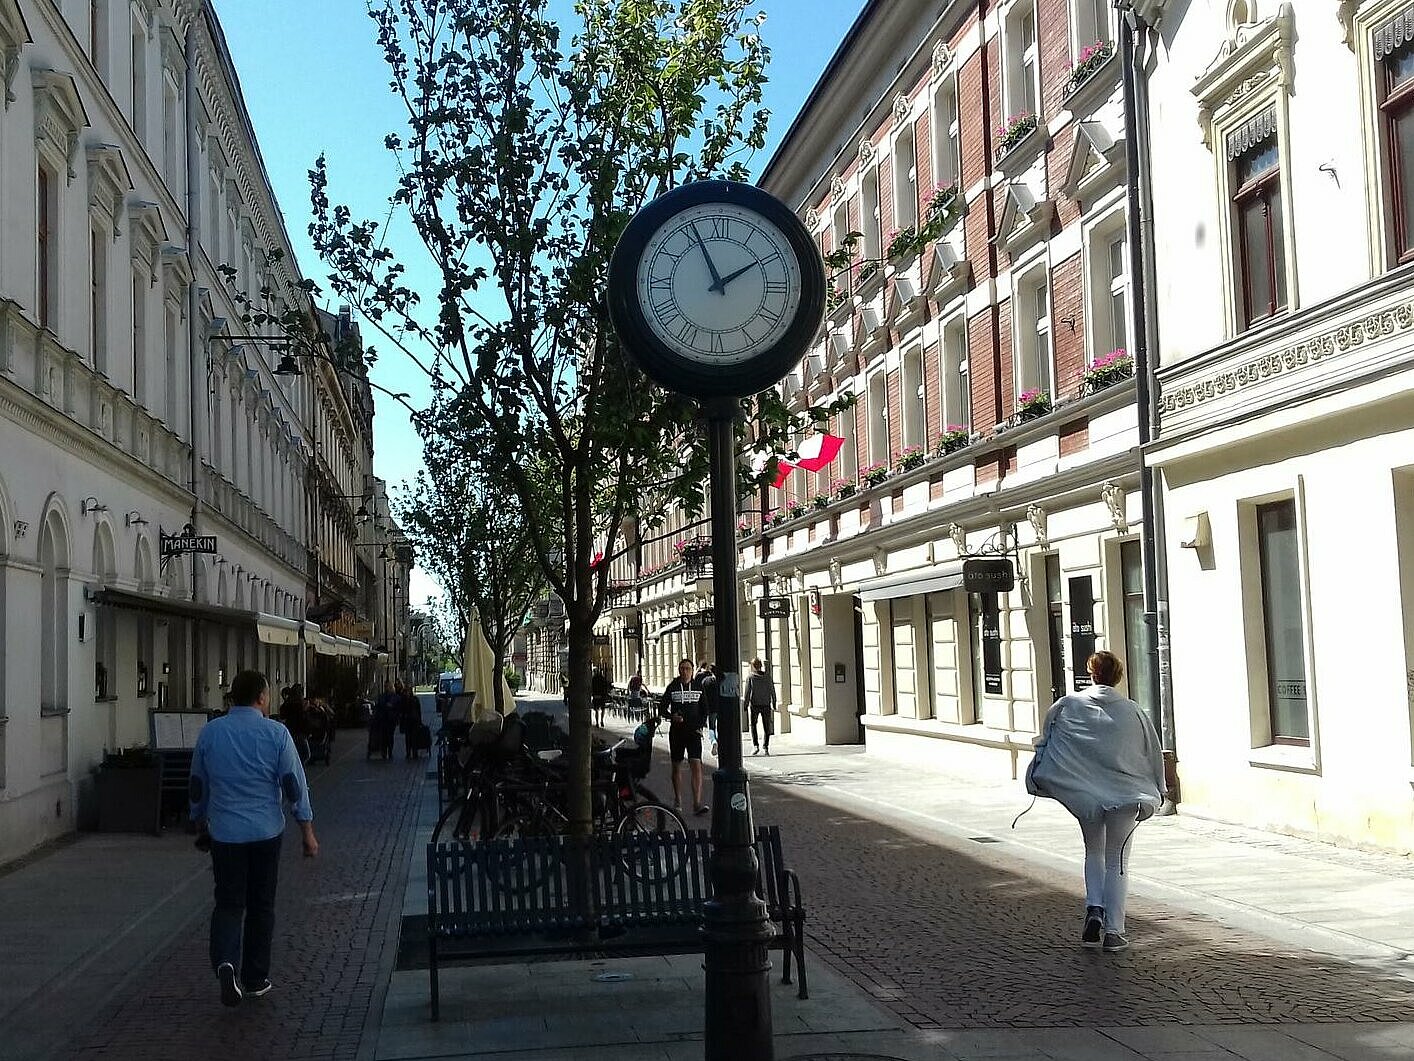 Clock on 6 sierpnia street - the place of Saturday concerts , H. Koper